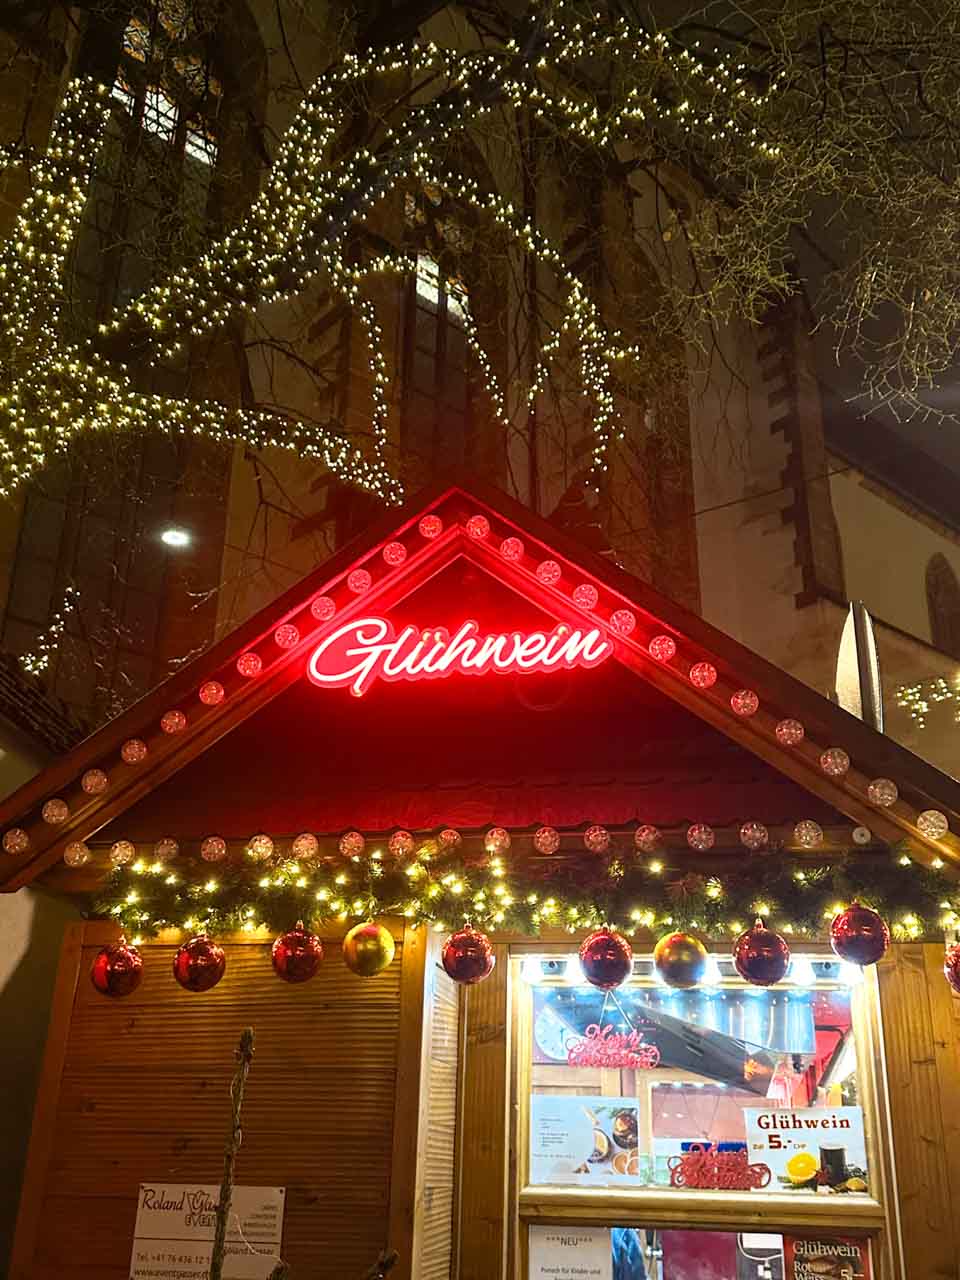 A cosy mulled wine stall at the Basel Christmas market on Barfüsserplatz, illuminated by twinkling lights and festive decorations